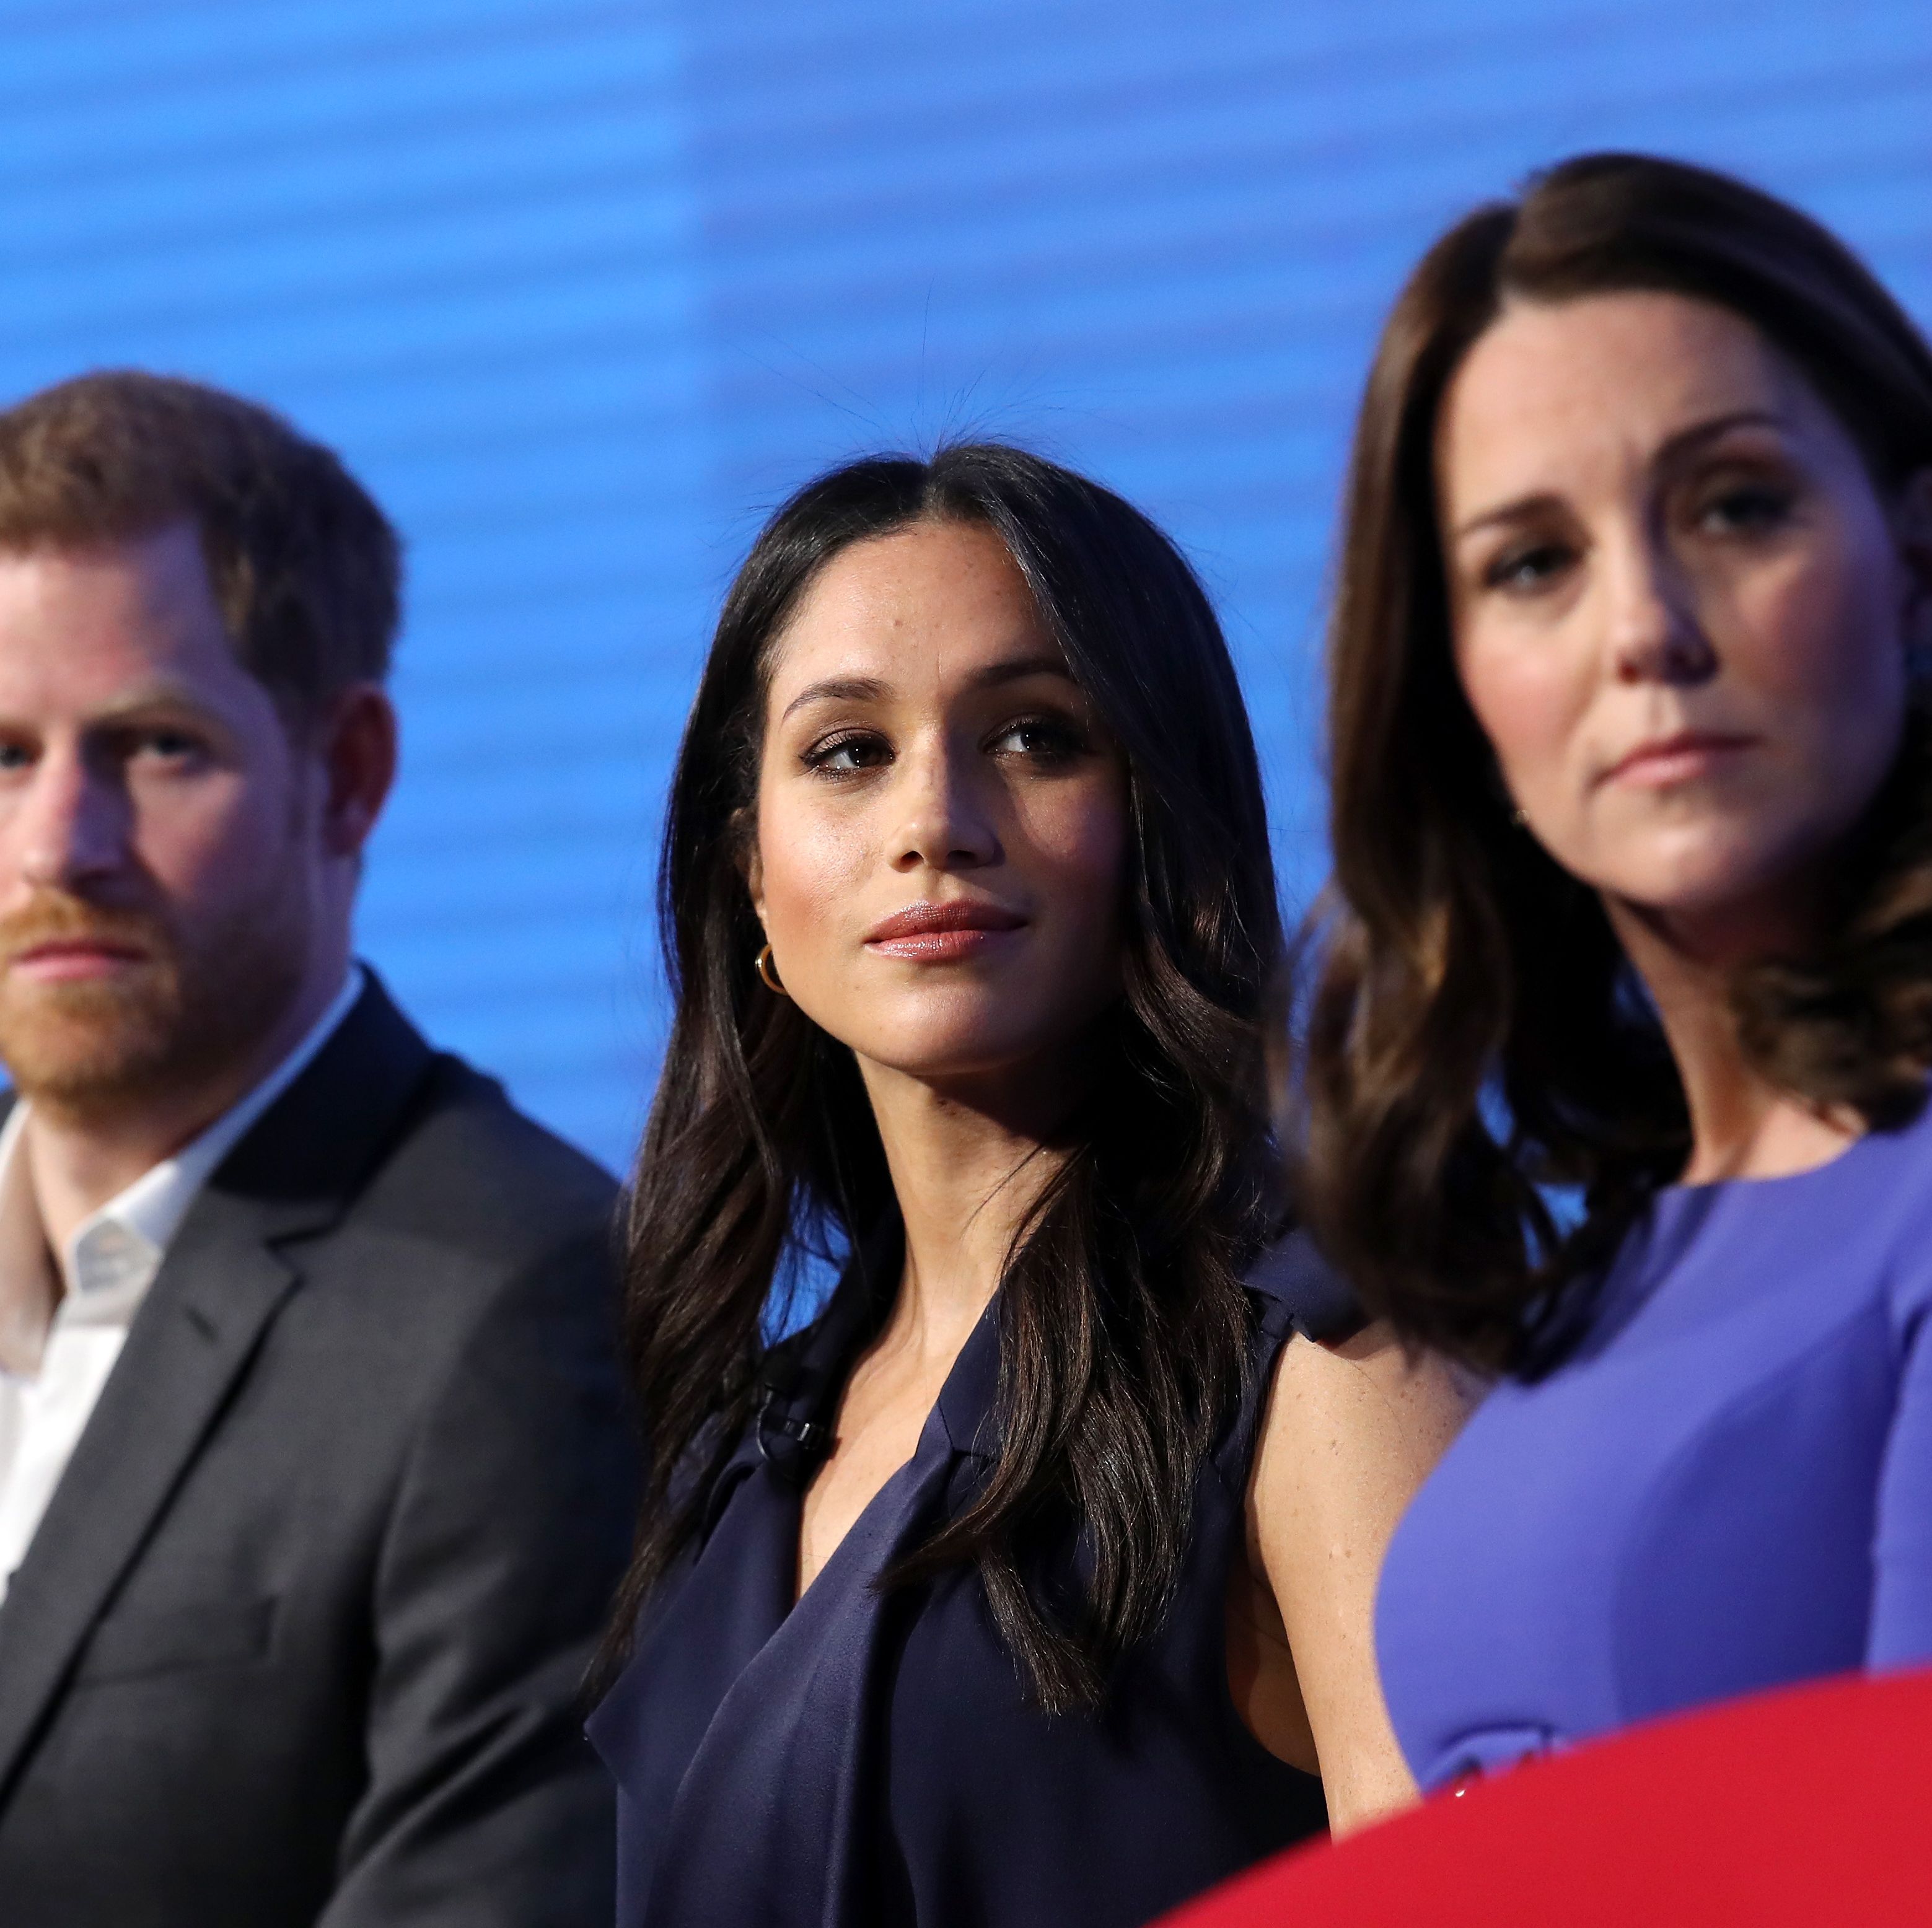 Why Prince Harry Leaking Kate Middleton's Texts to Meghan Markle Is Such a Big Deal